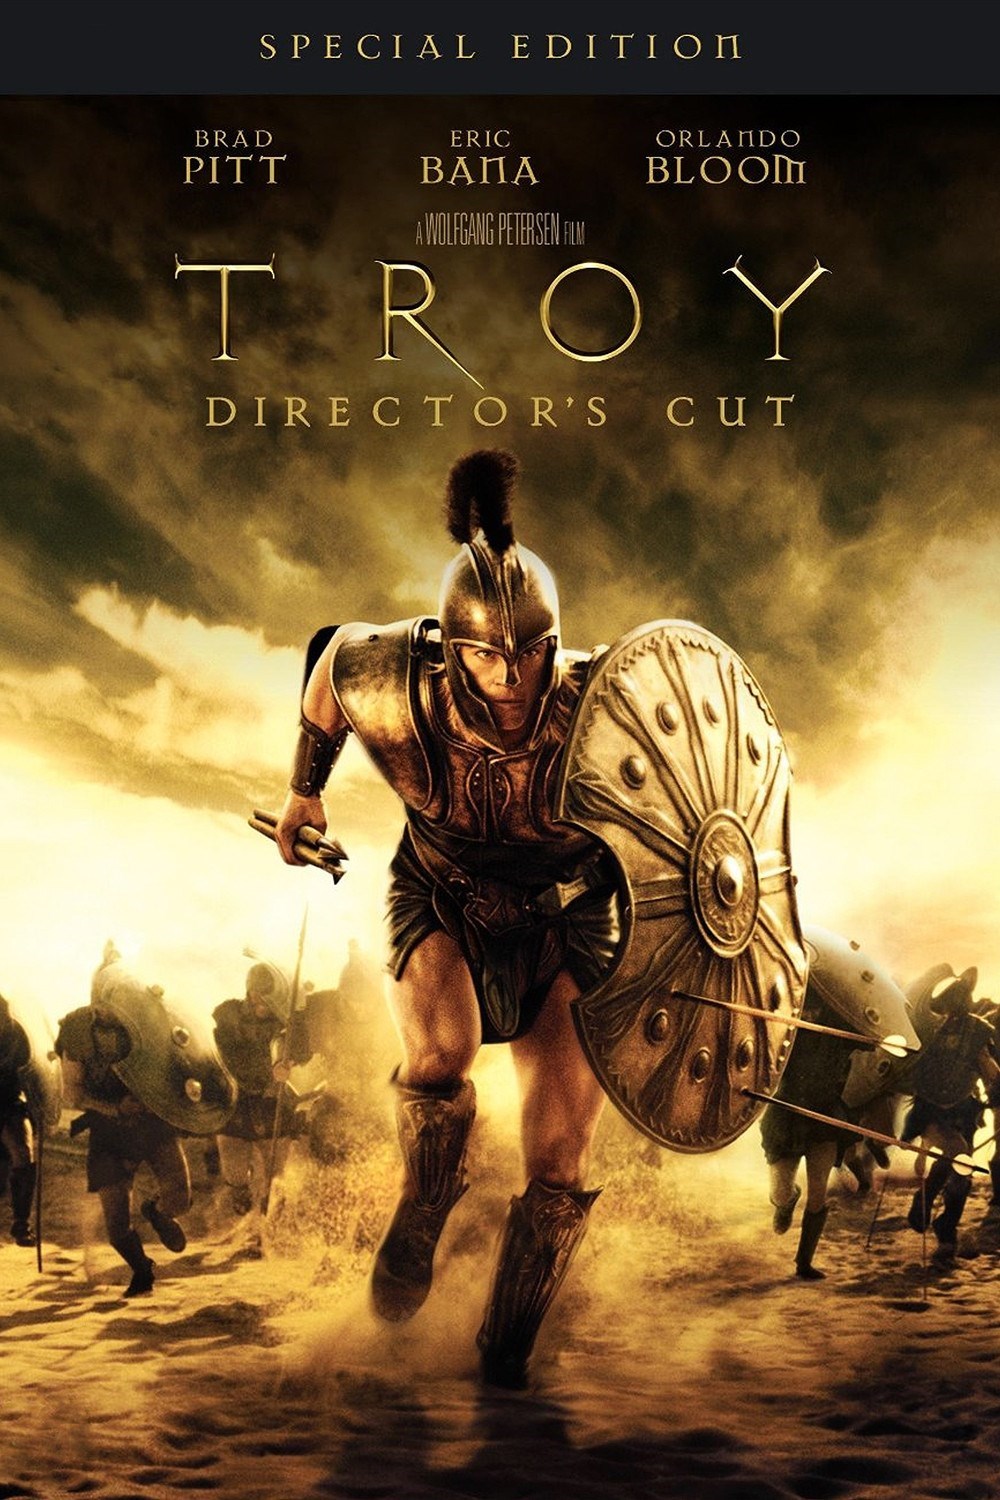 HD Troy Wallpapers and Photos | HD Movie Wallpapers